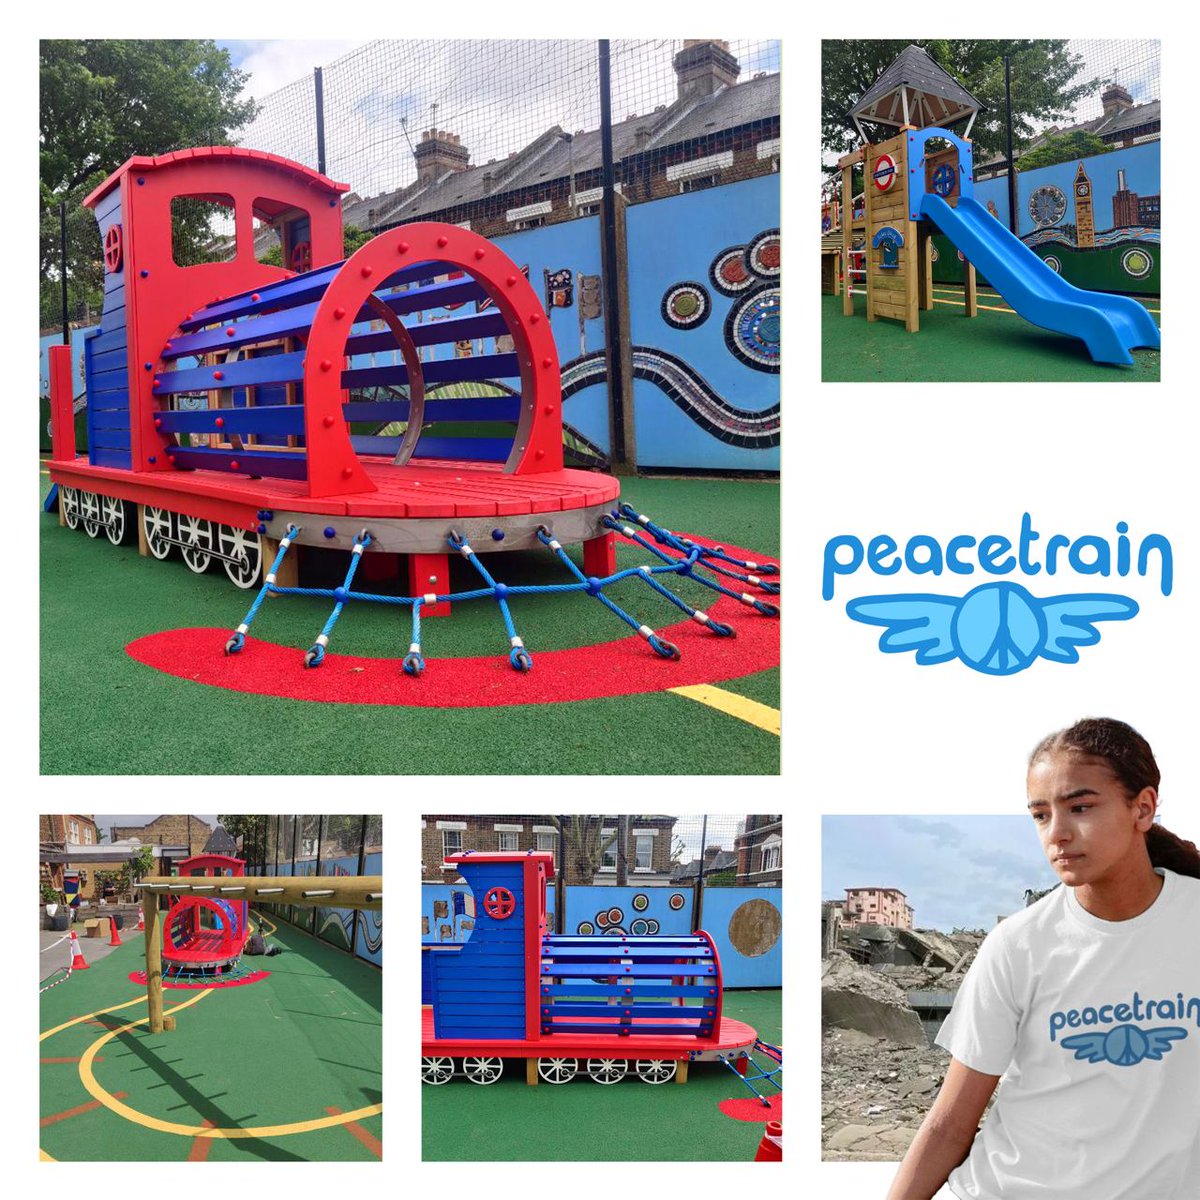 Happy to announce the Peace Train playground has arrived in Shaftesbury Park Primary School in South London! Praying for the day that the Peace Train arrives in Gaza.

@ShaftesburyPk #Peace #Hope #Palestine #Gaza #Peacetrain